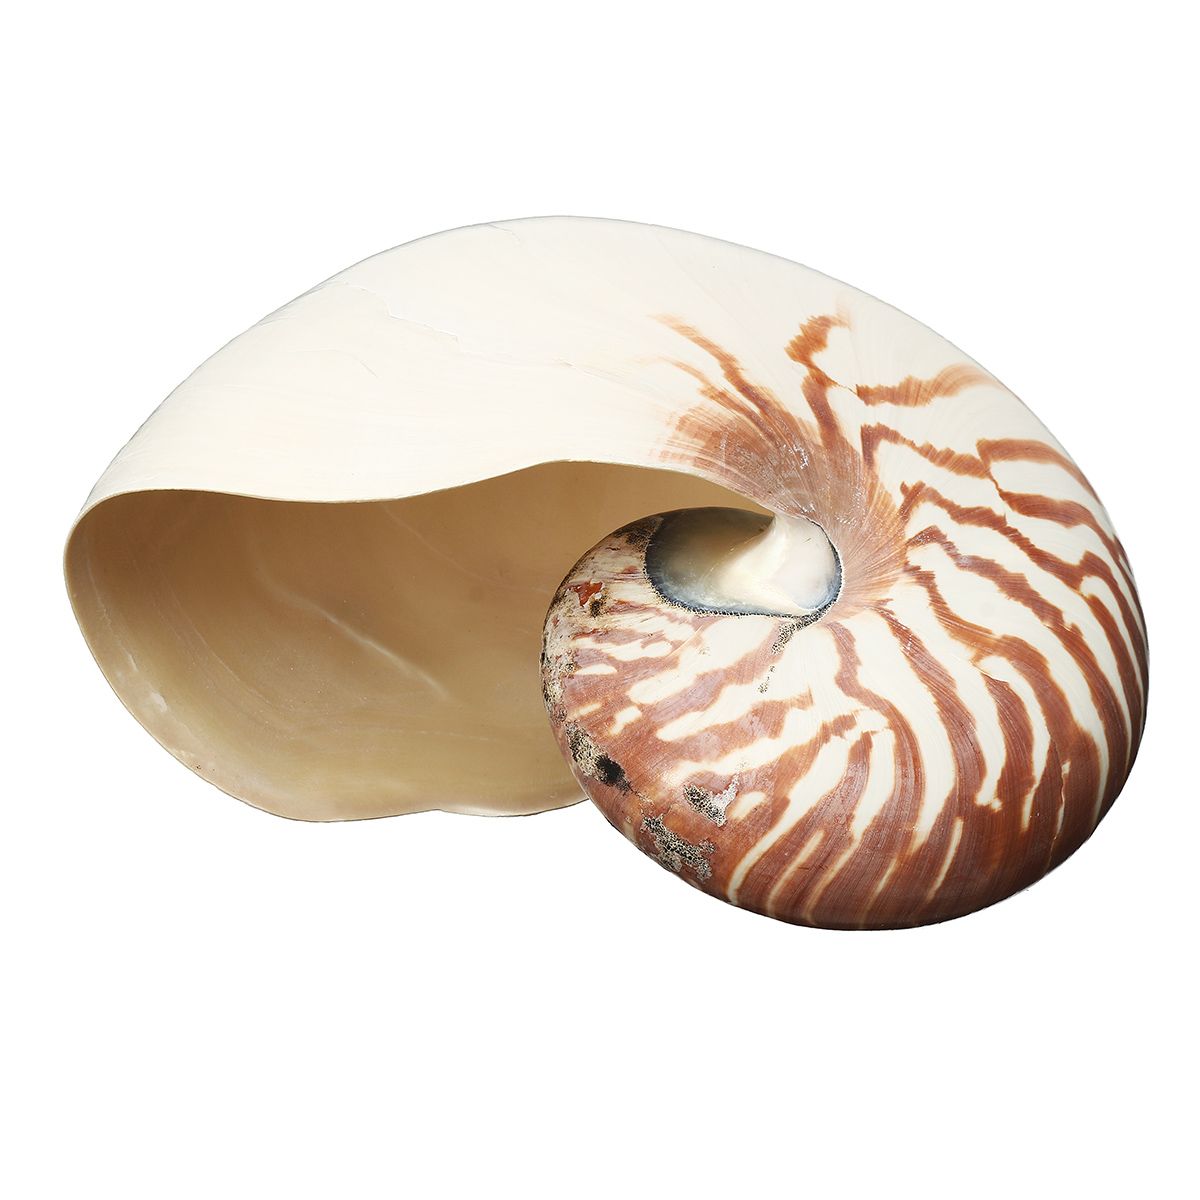 17-19cm-Natural-Conch-SeaShell-Tiger-Chambered-Pompilius-Fish-Tank-Home-Decorations-1476998